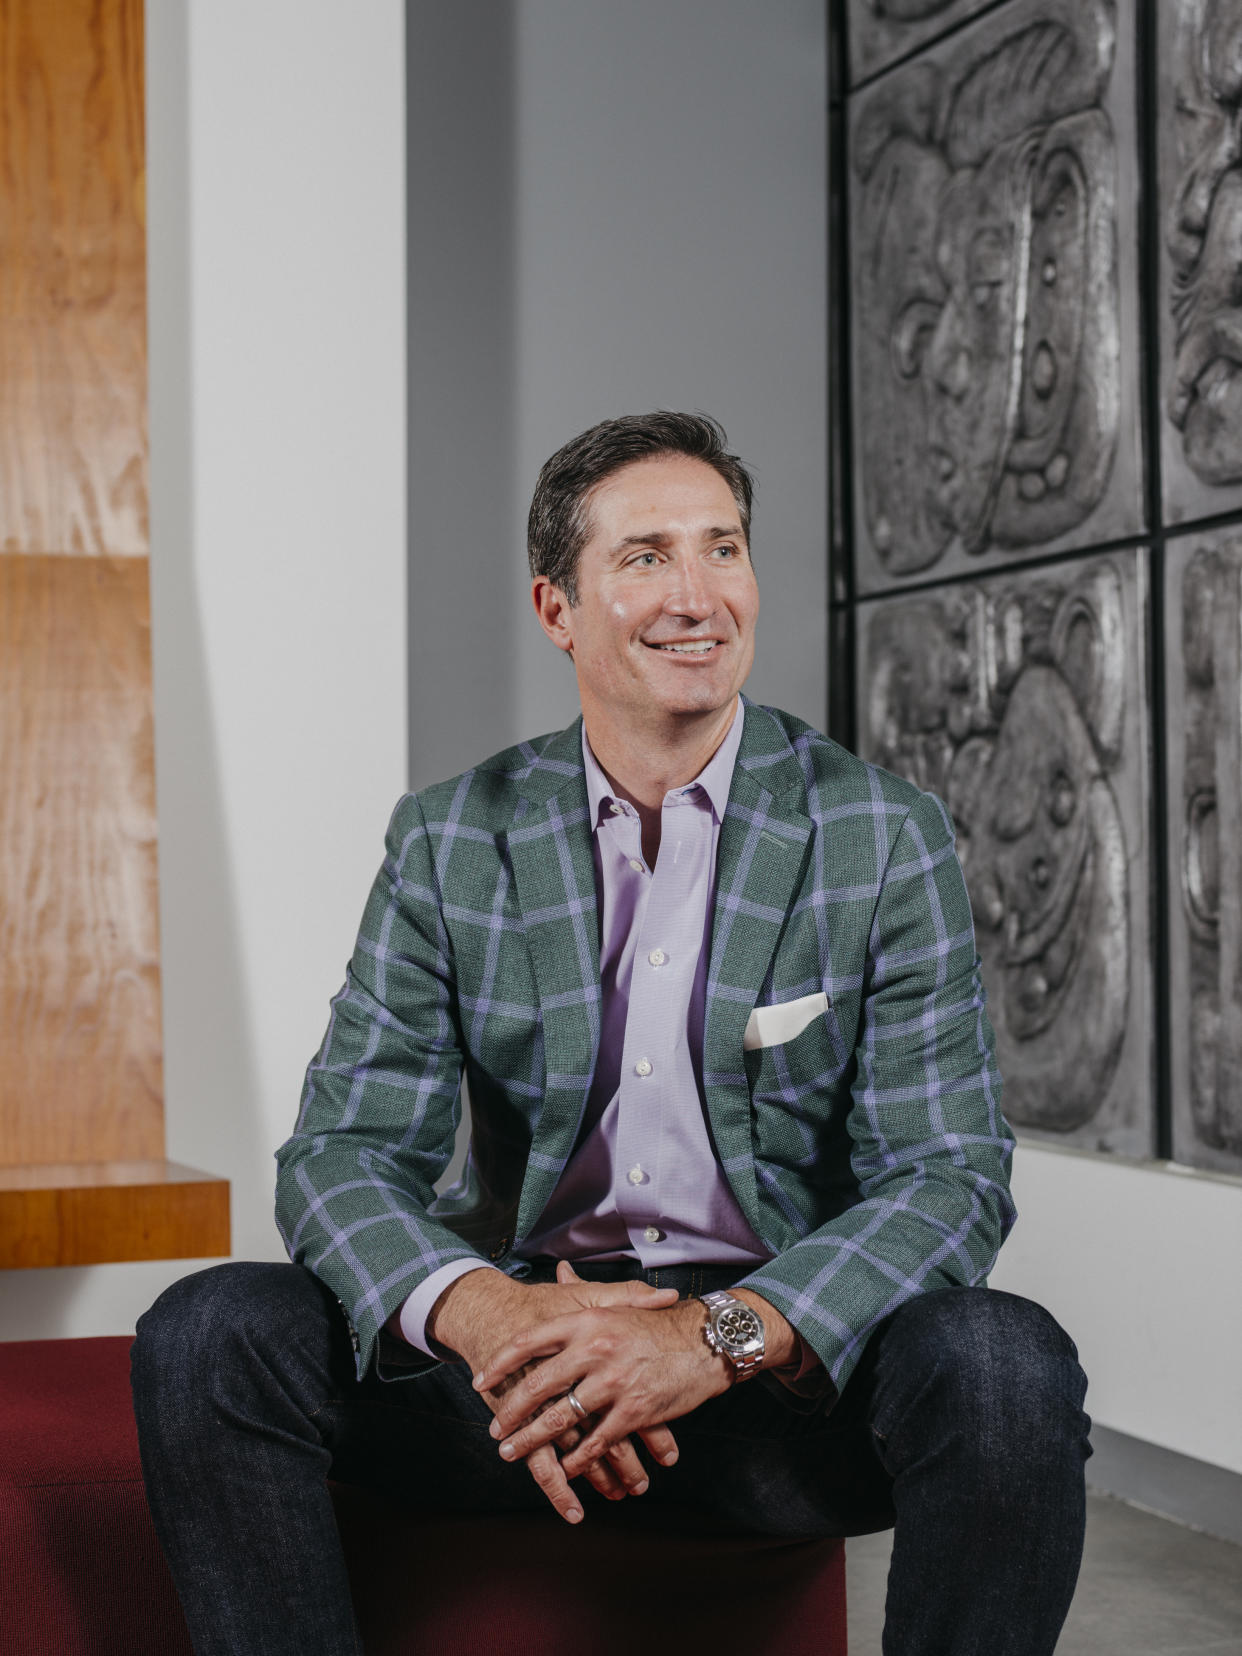 Brian Niccol, the chief executive of Chipotle Mexican Grill, in Denver, June 19, 2018. (Benjamin Rasmussen/The New York Times)